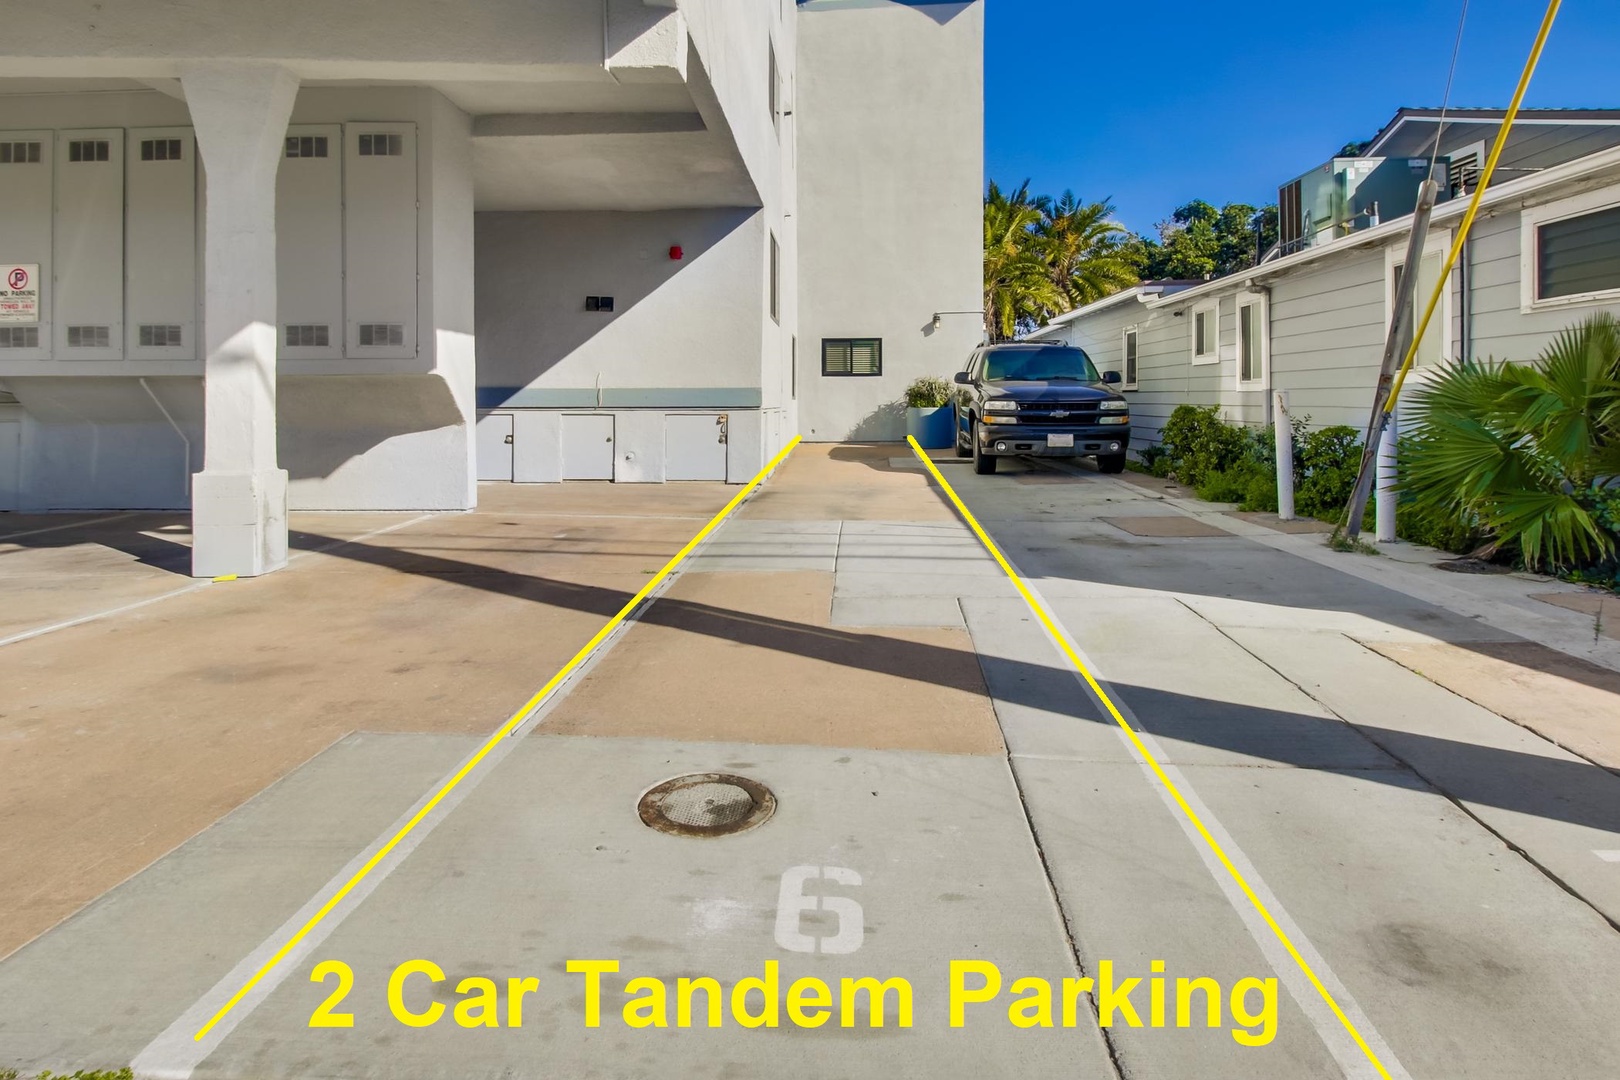 Tandem parking for up to 2 cars